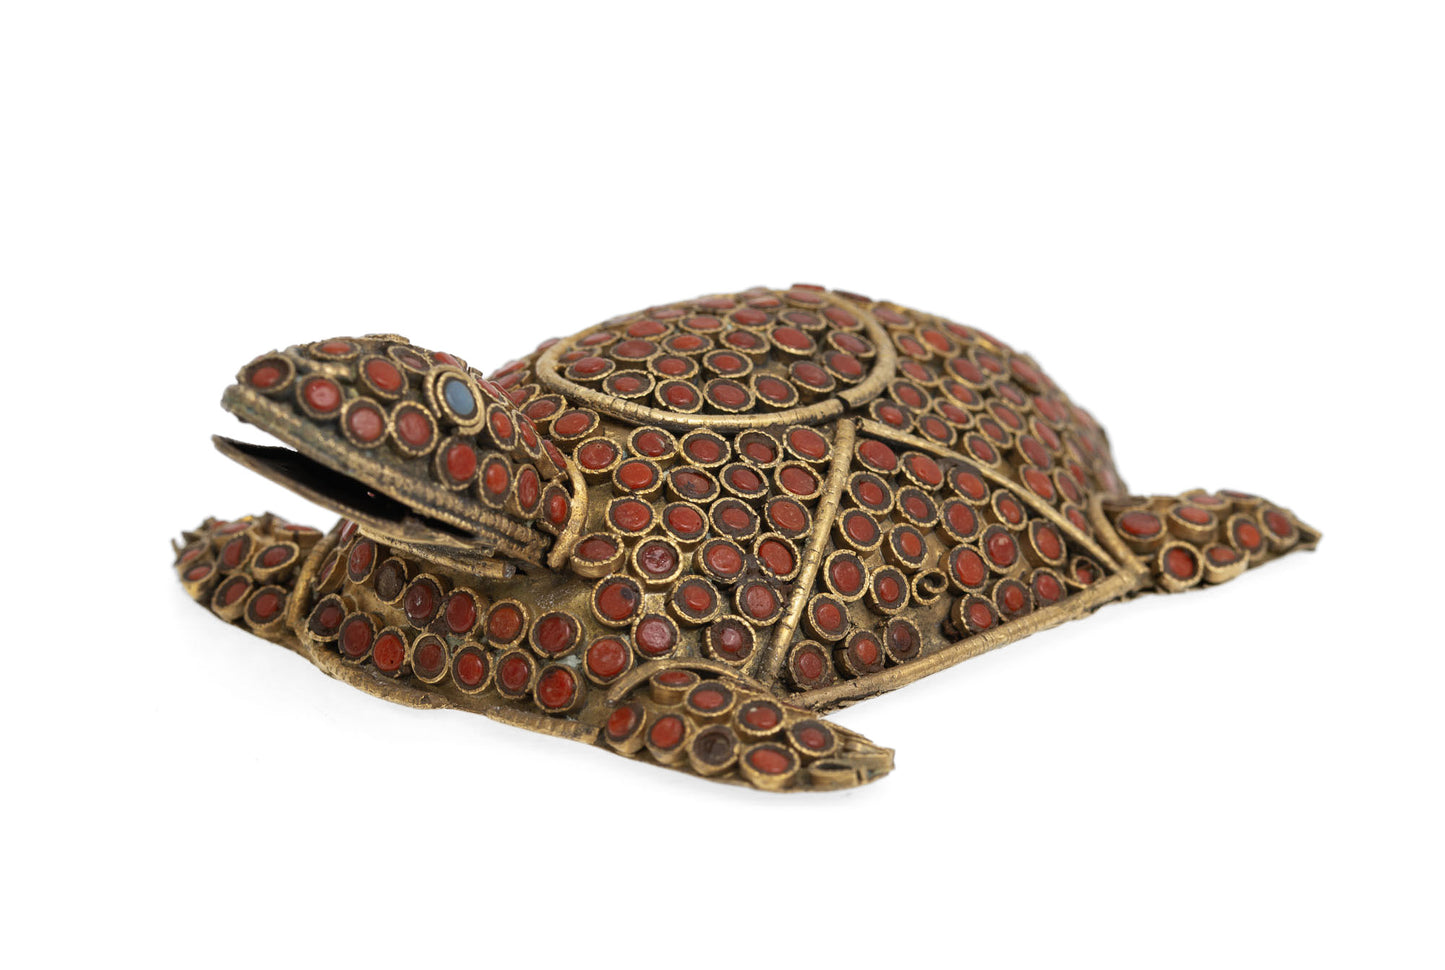 Vintage Hand Made Nepal Figure/Model of a Turtle in Gilt Metal & Coral Cabochons (2929)